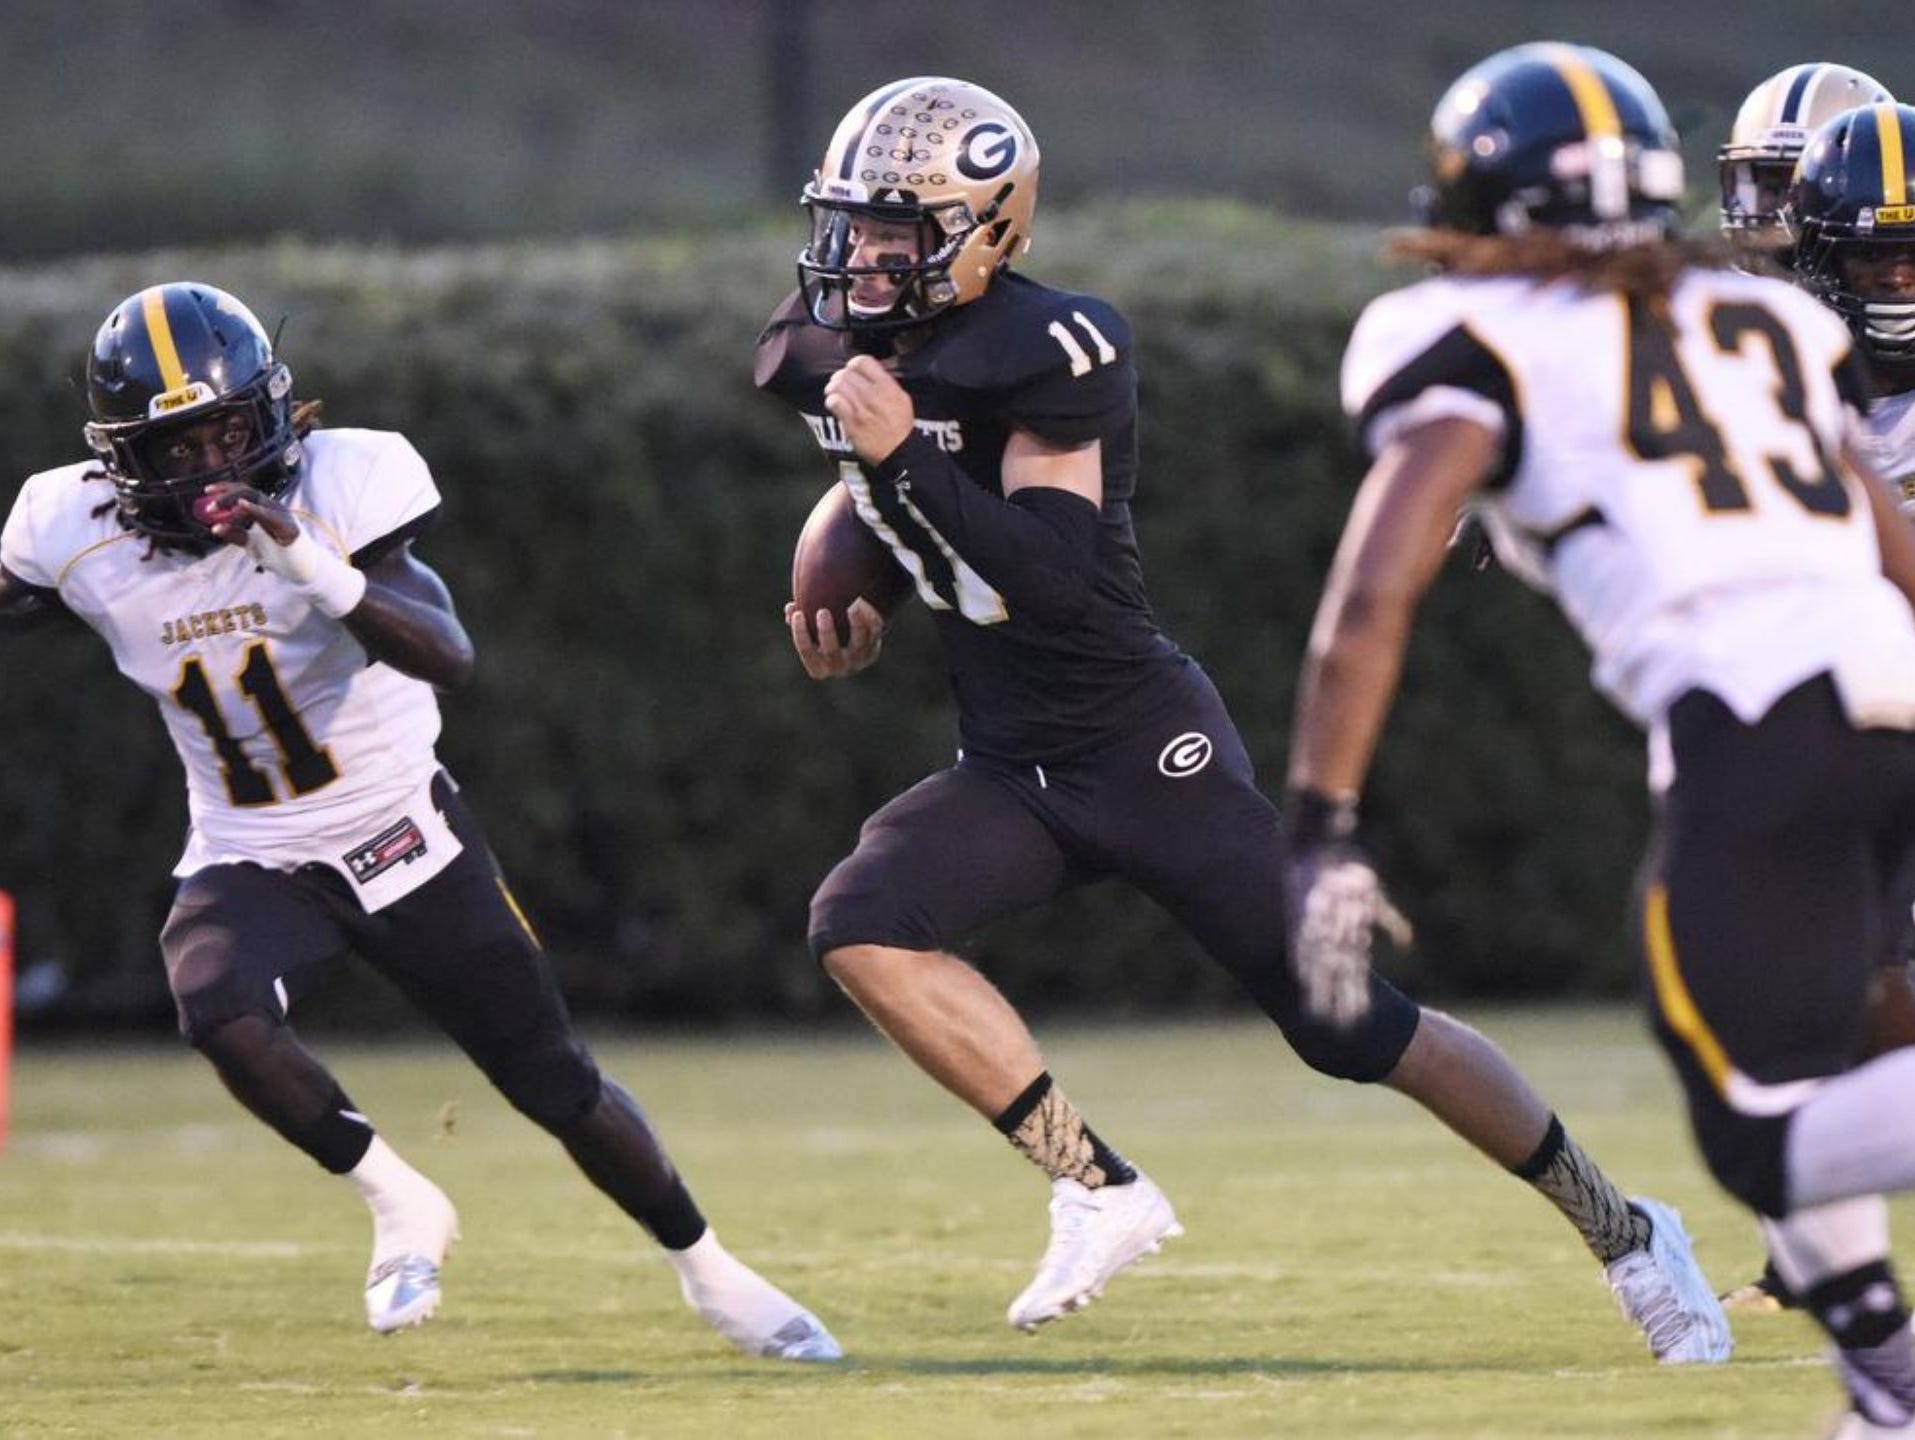 Senior quarterback Mario Cusano (11) and the Greer Yellow Jackets will host the Union County Yellow Jackets in a Class AAA second-round game Friday night.